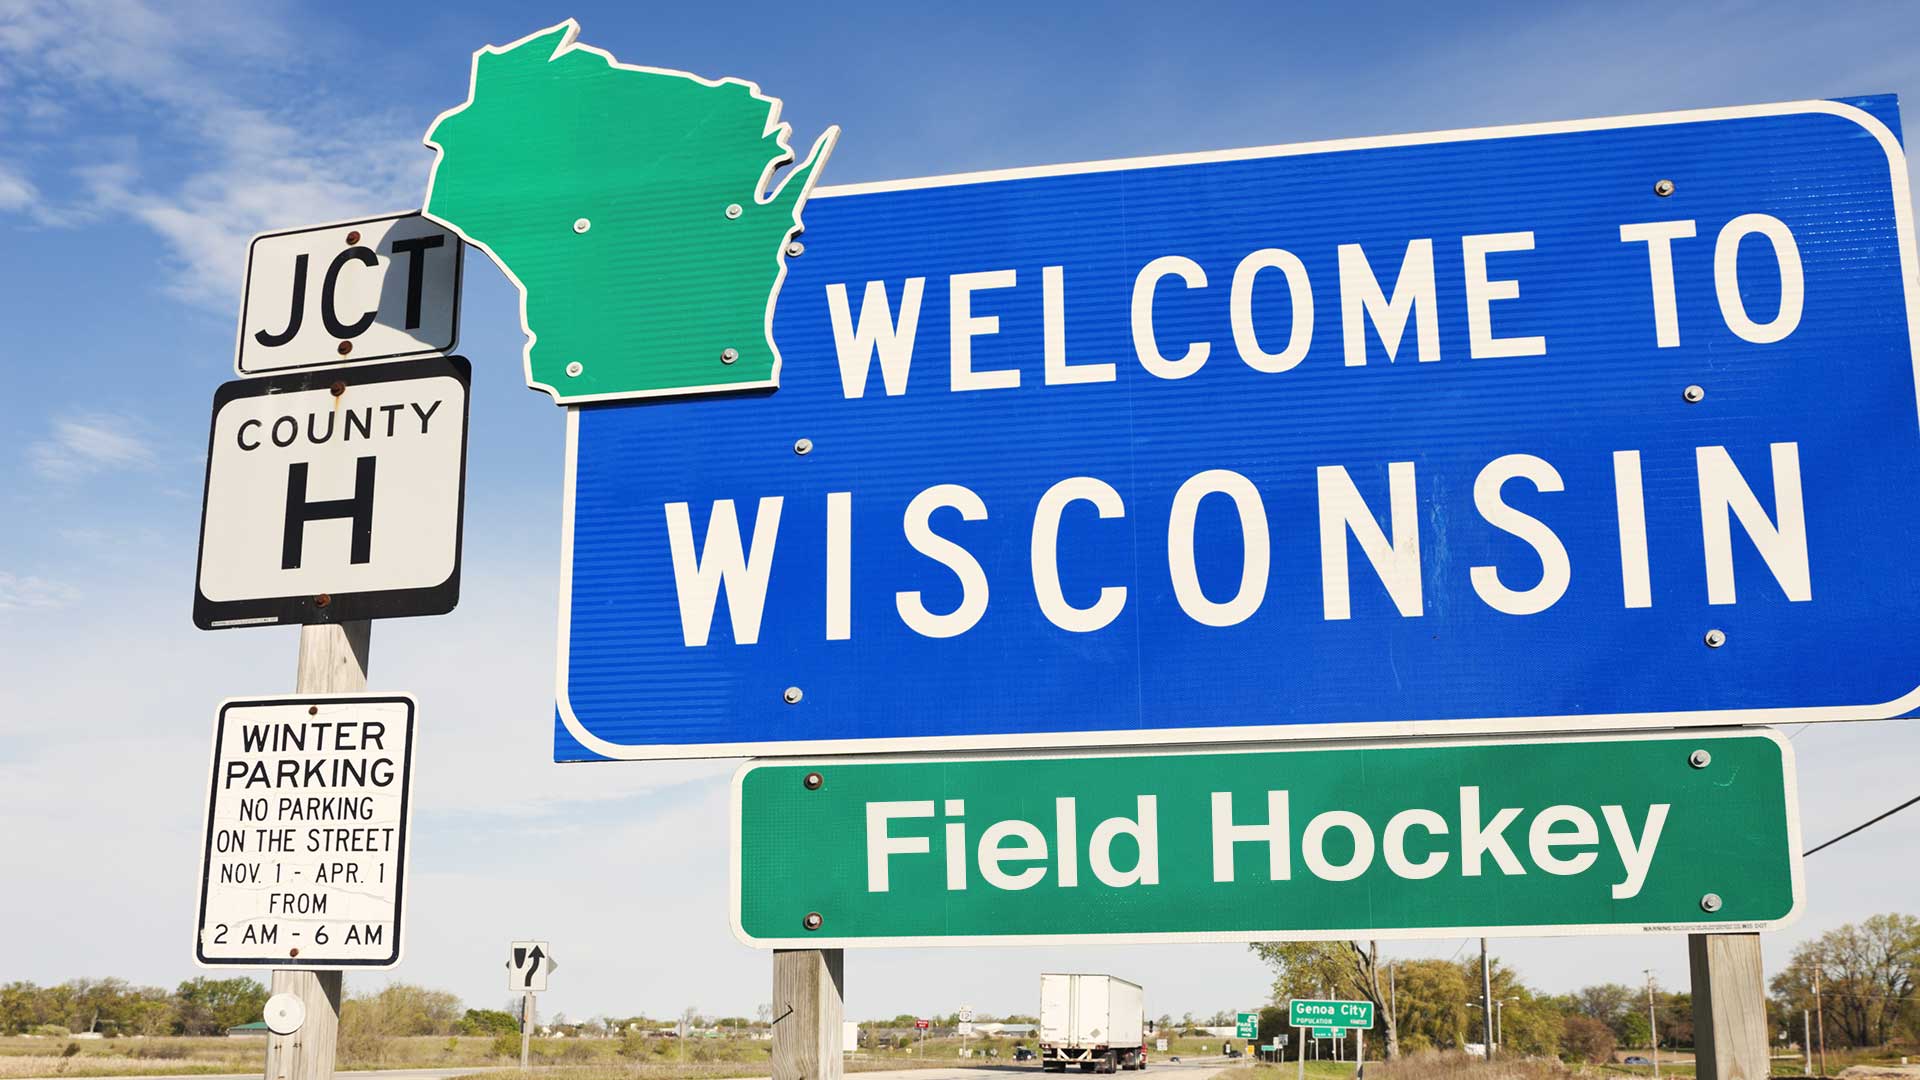 City-of-LaCrosse,-WI-votes-to-officially-change-its-name-to-Field-hockey.jpg